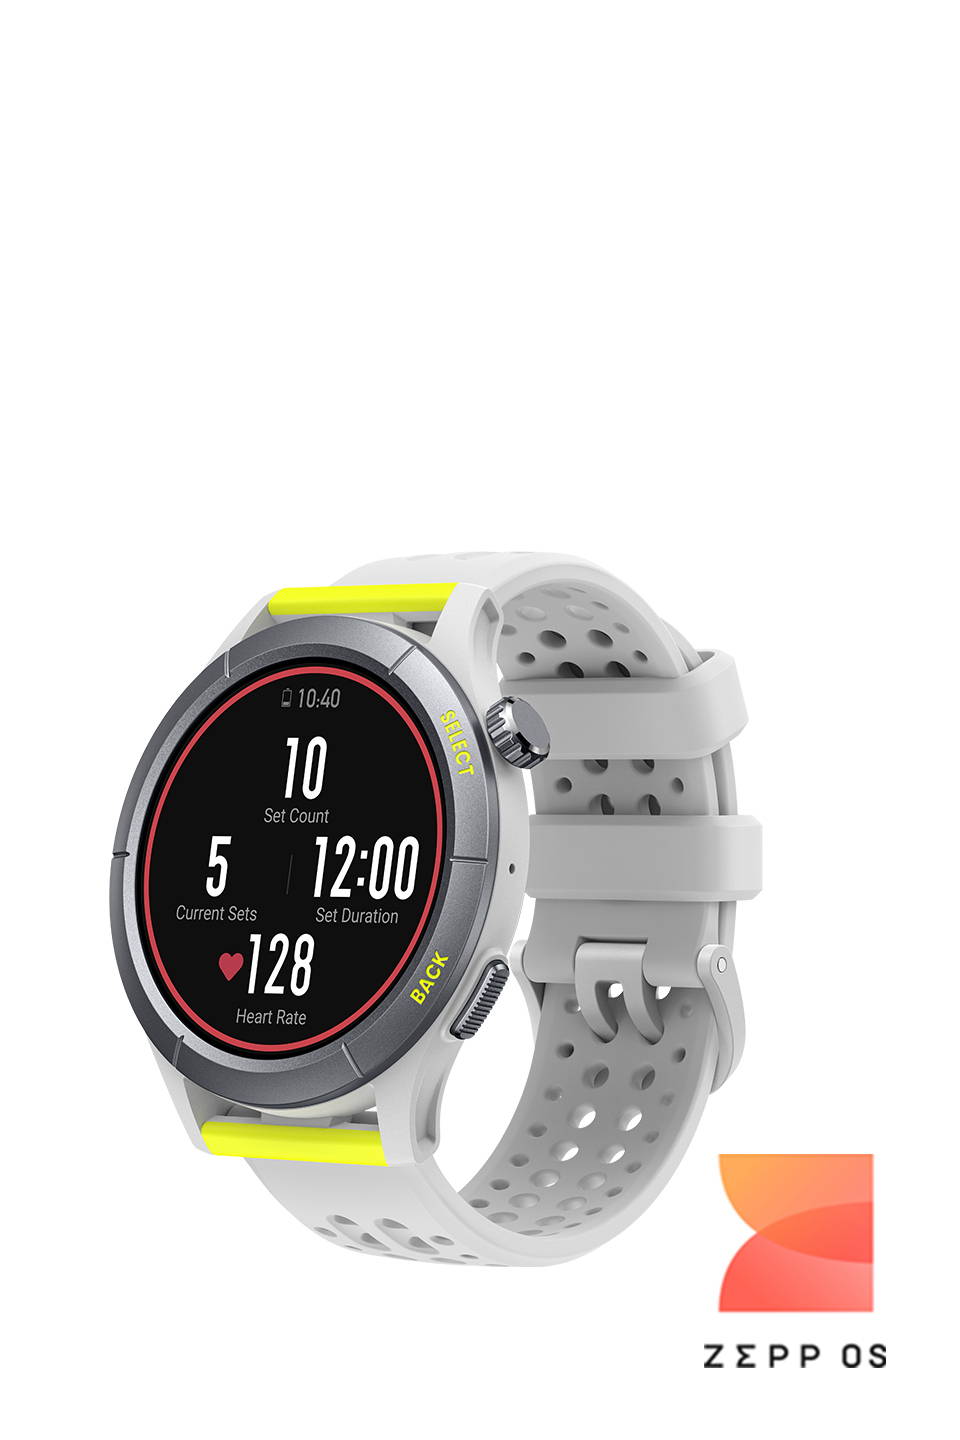 First look: Leaked images of the upcoming Amazfit Cheetah series : r/amazfit